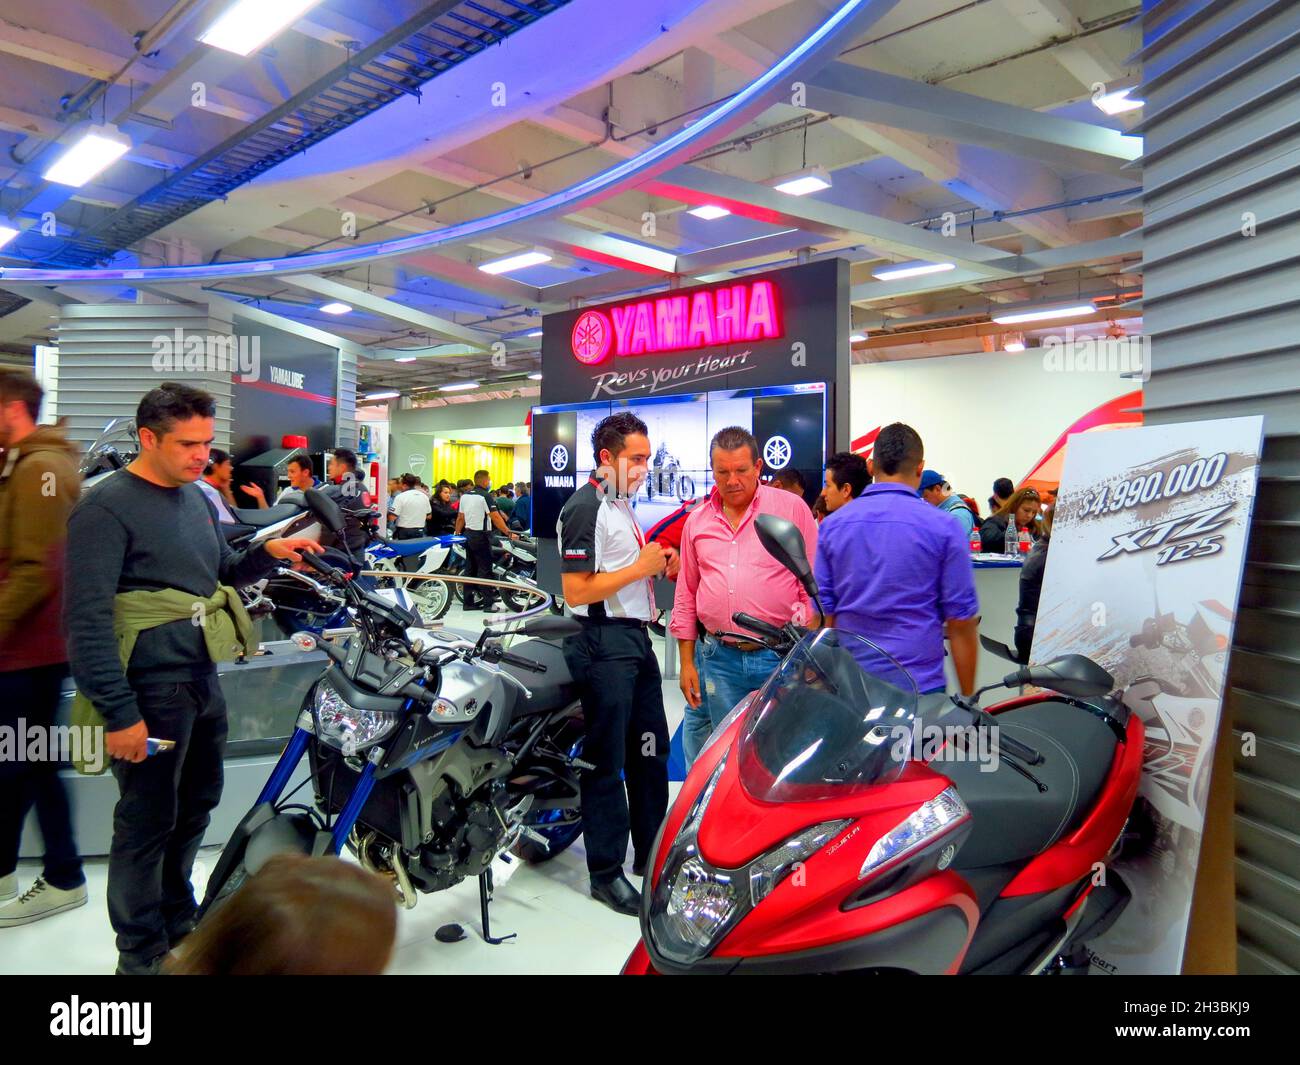 BOGOTA, COLOMBIA - May 31, 2018: A group of people at a car and motorcycle exhibition in Bogota, Colombia Stock Photo